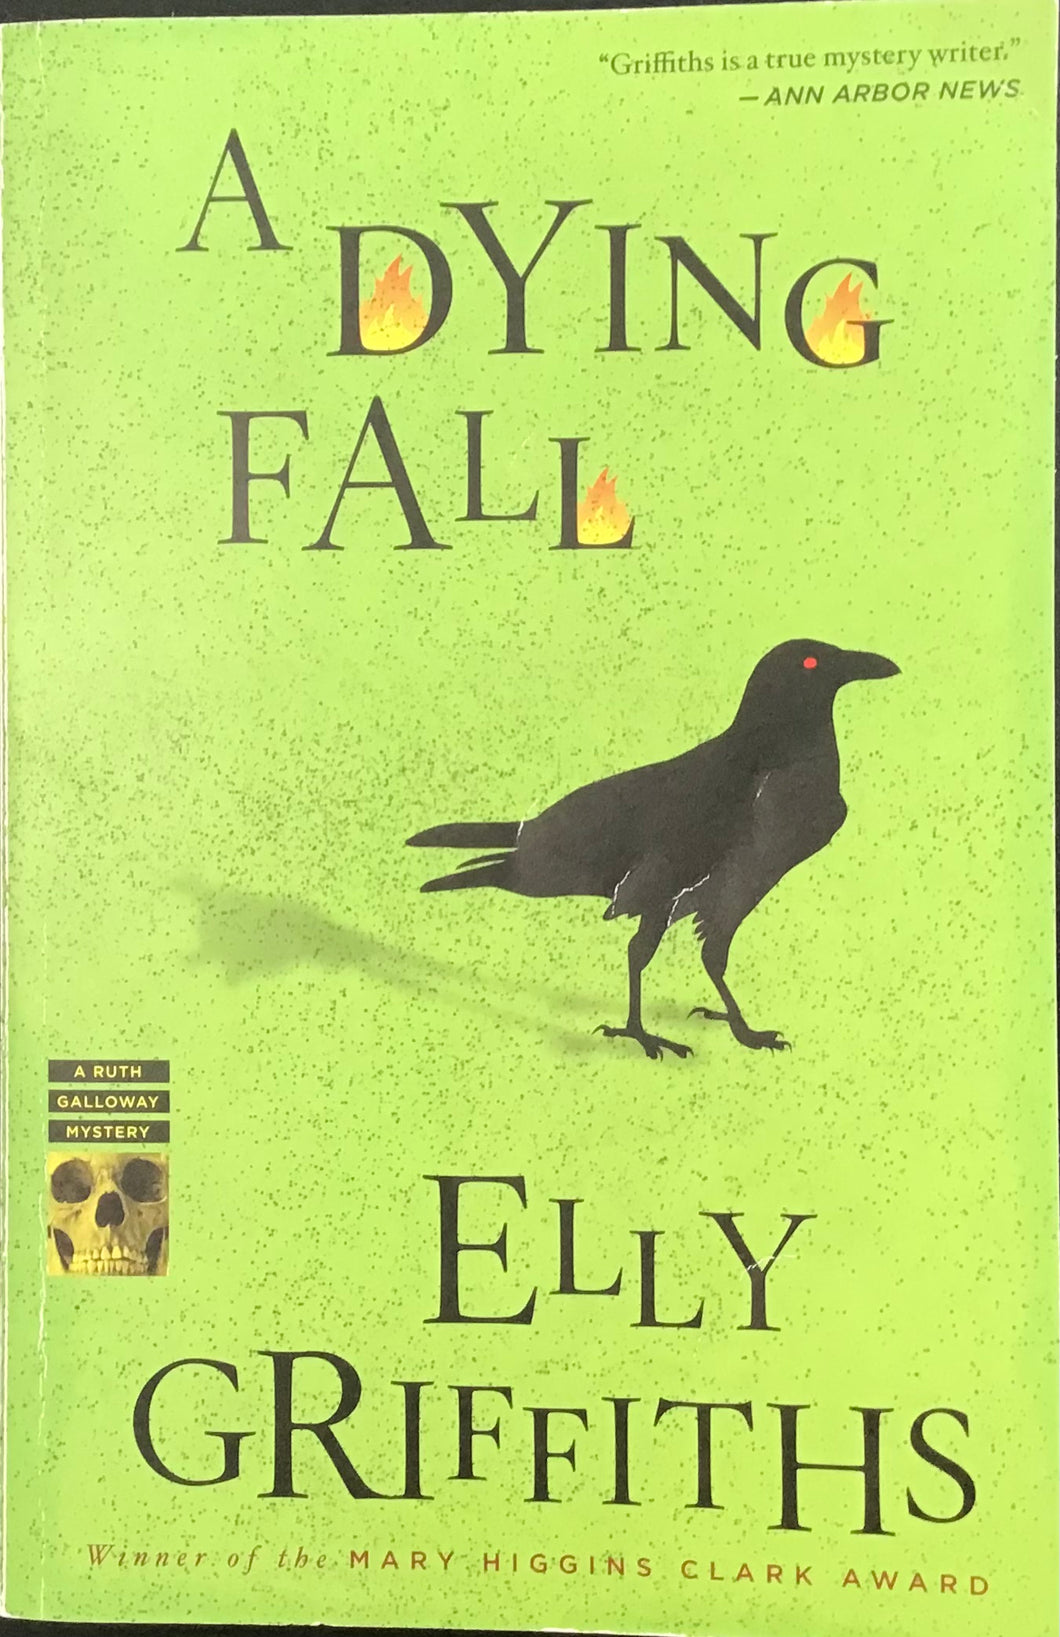 The Dying Fall, Elly Griffiths